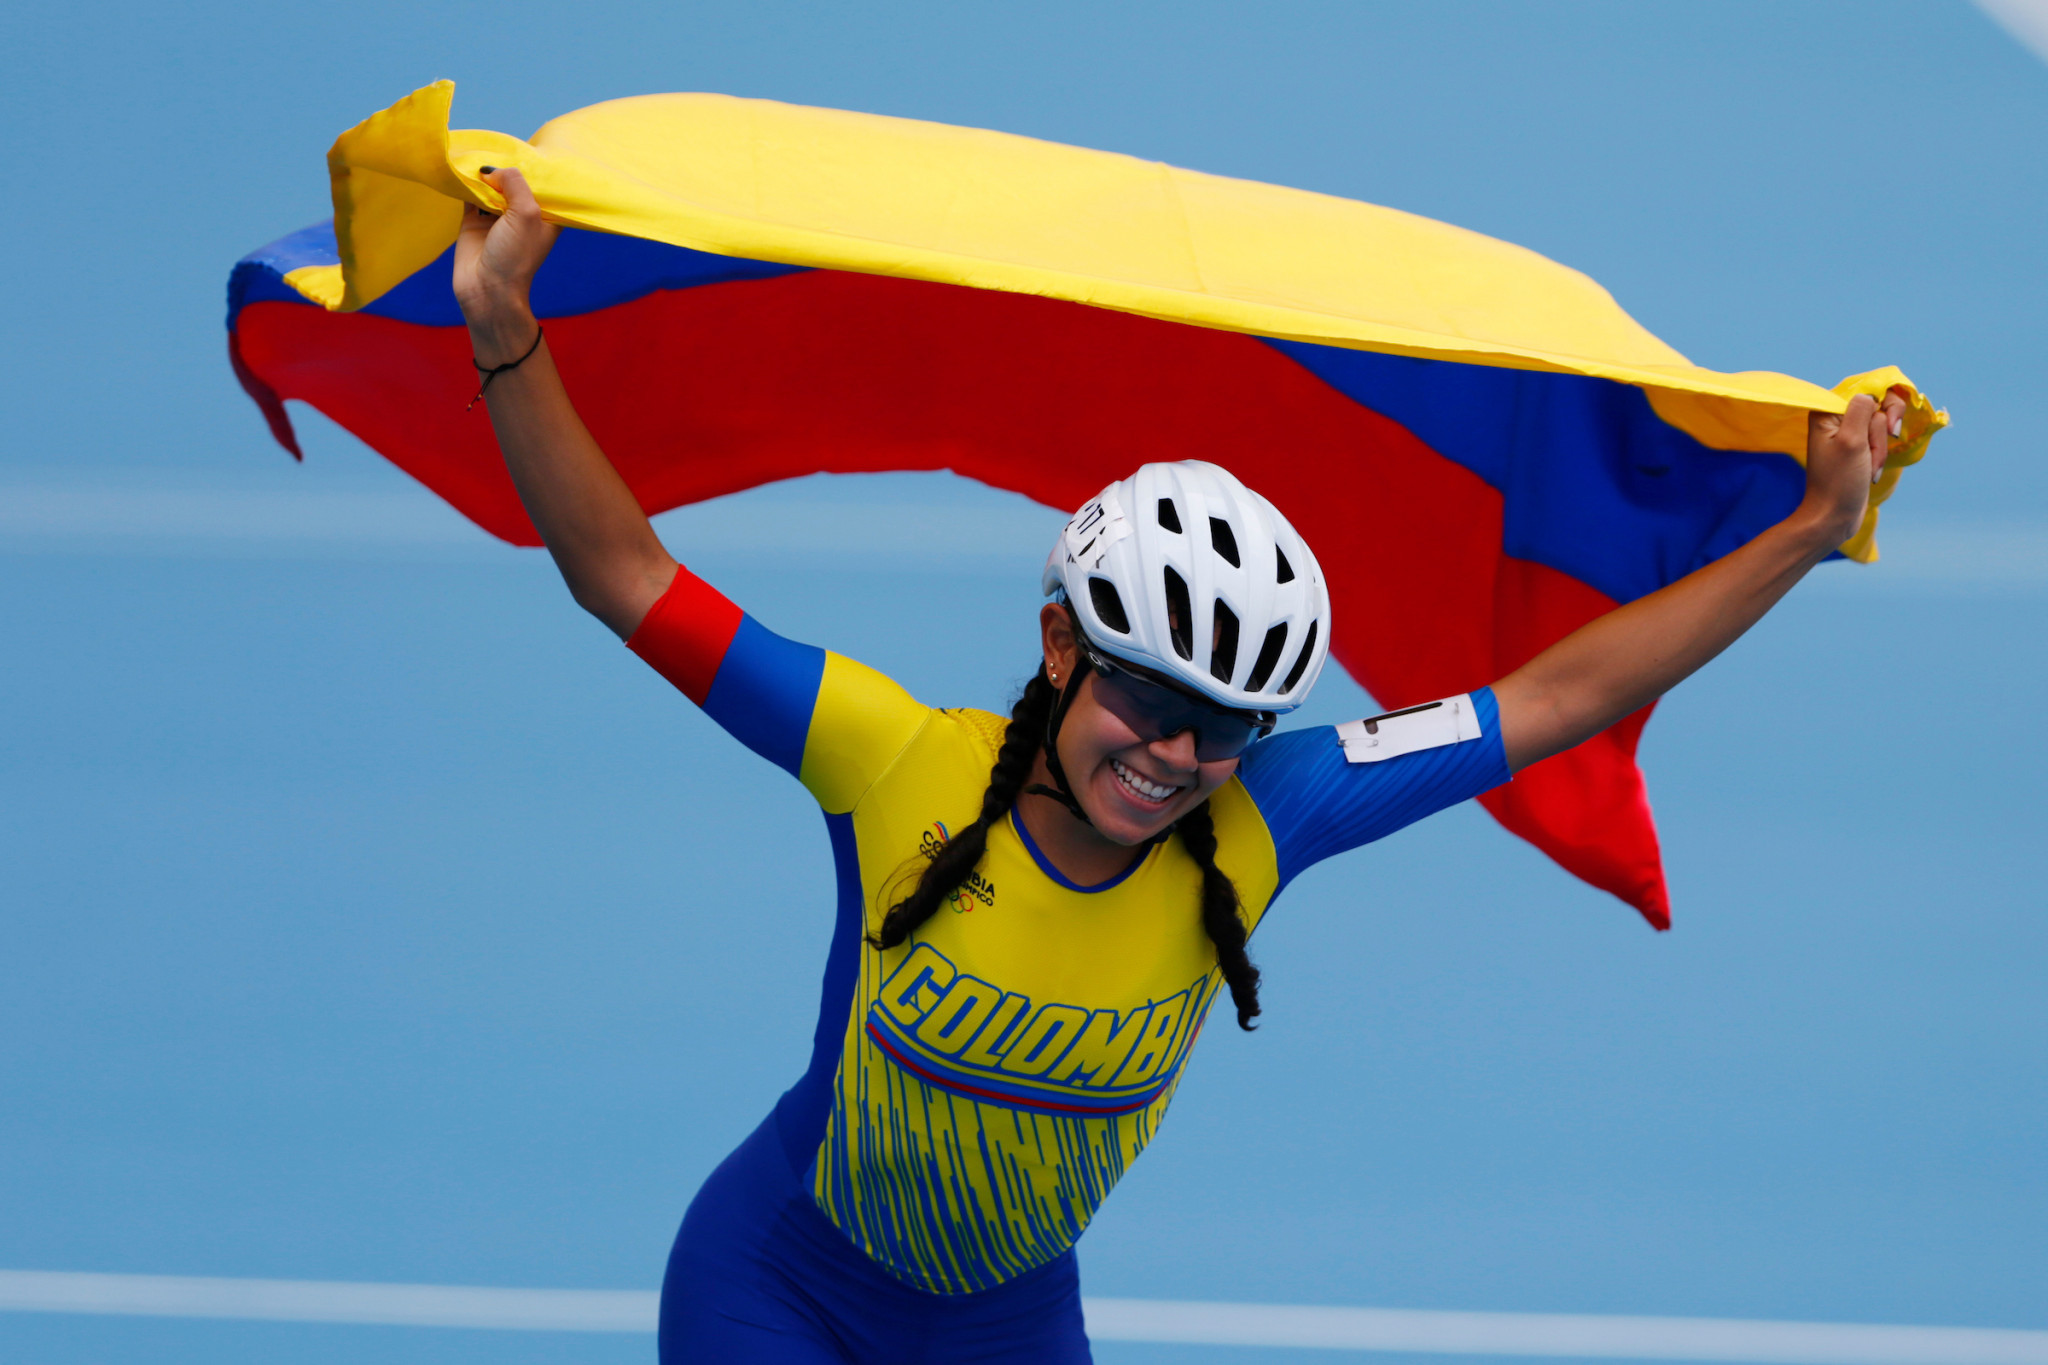 Colombian Valeria Rodríguez booked her ticket to the Santiago 2023 Pan American Games with a win in the women's 200m speed skating at the World Cup Skate Track in Cali ©Agencia.Xpress Media